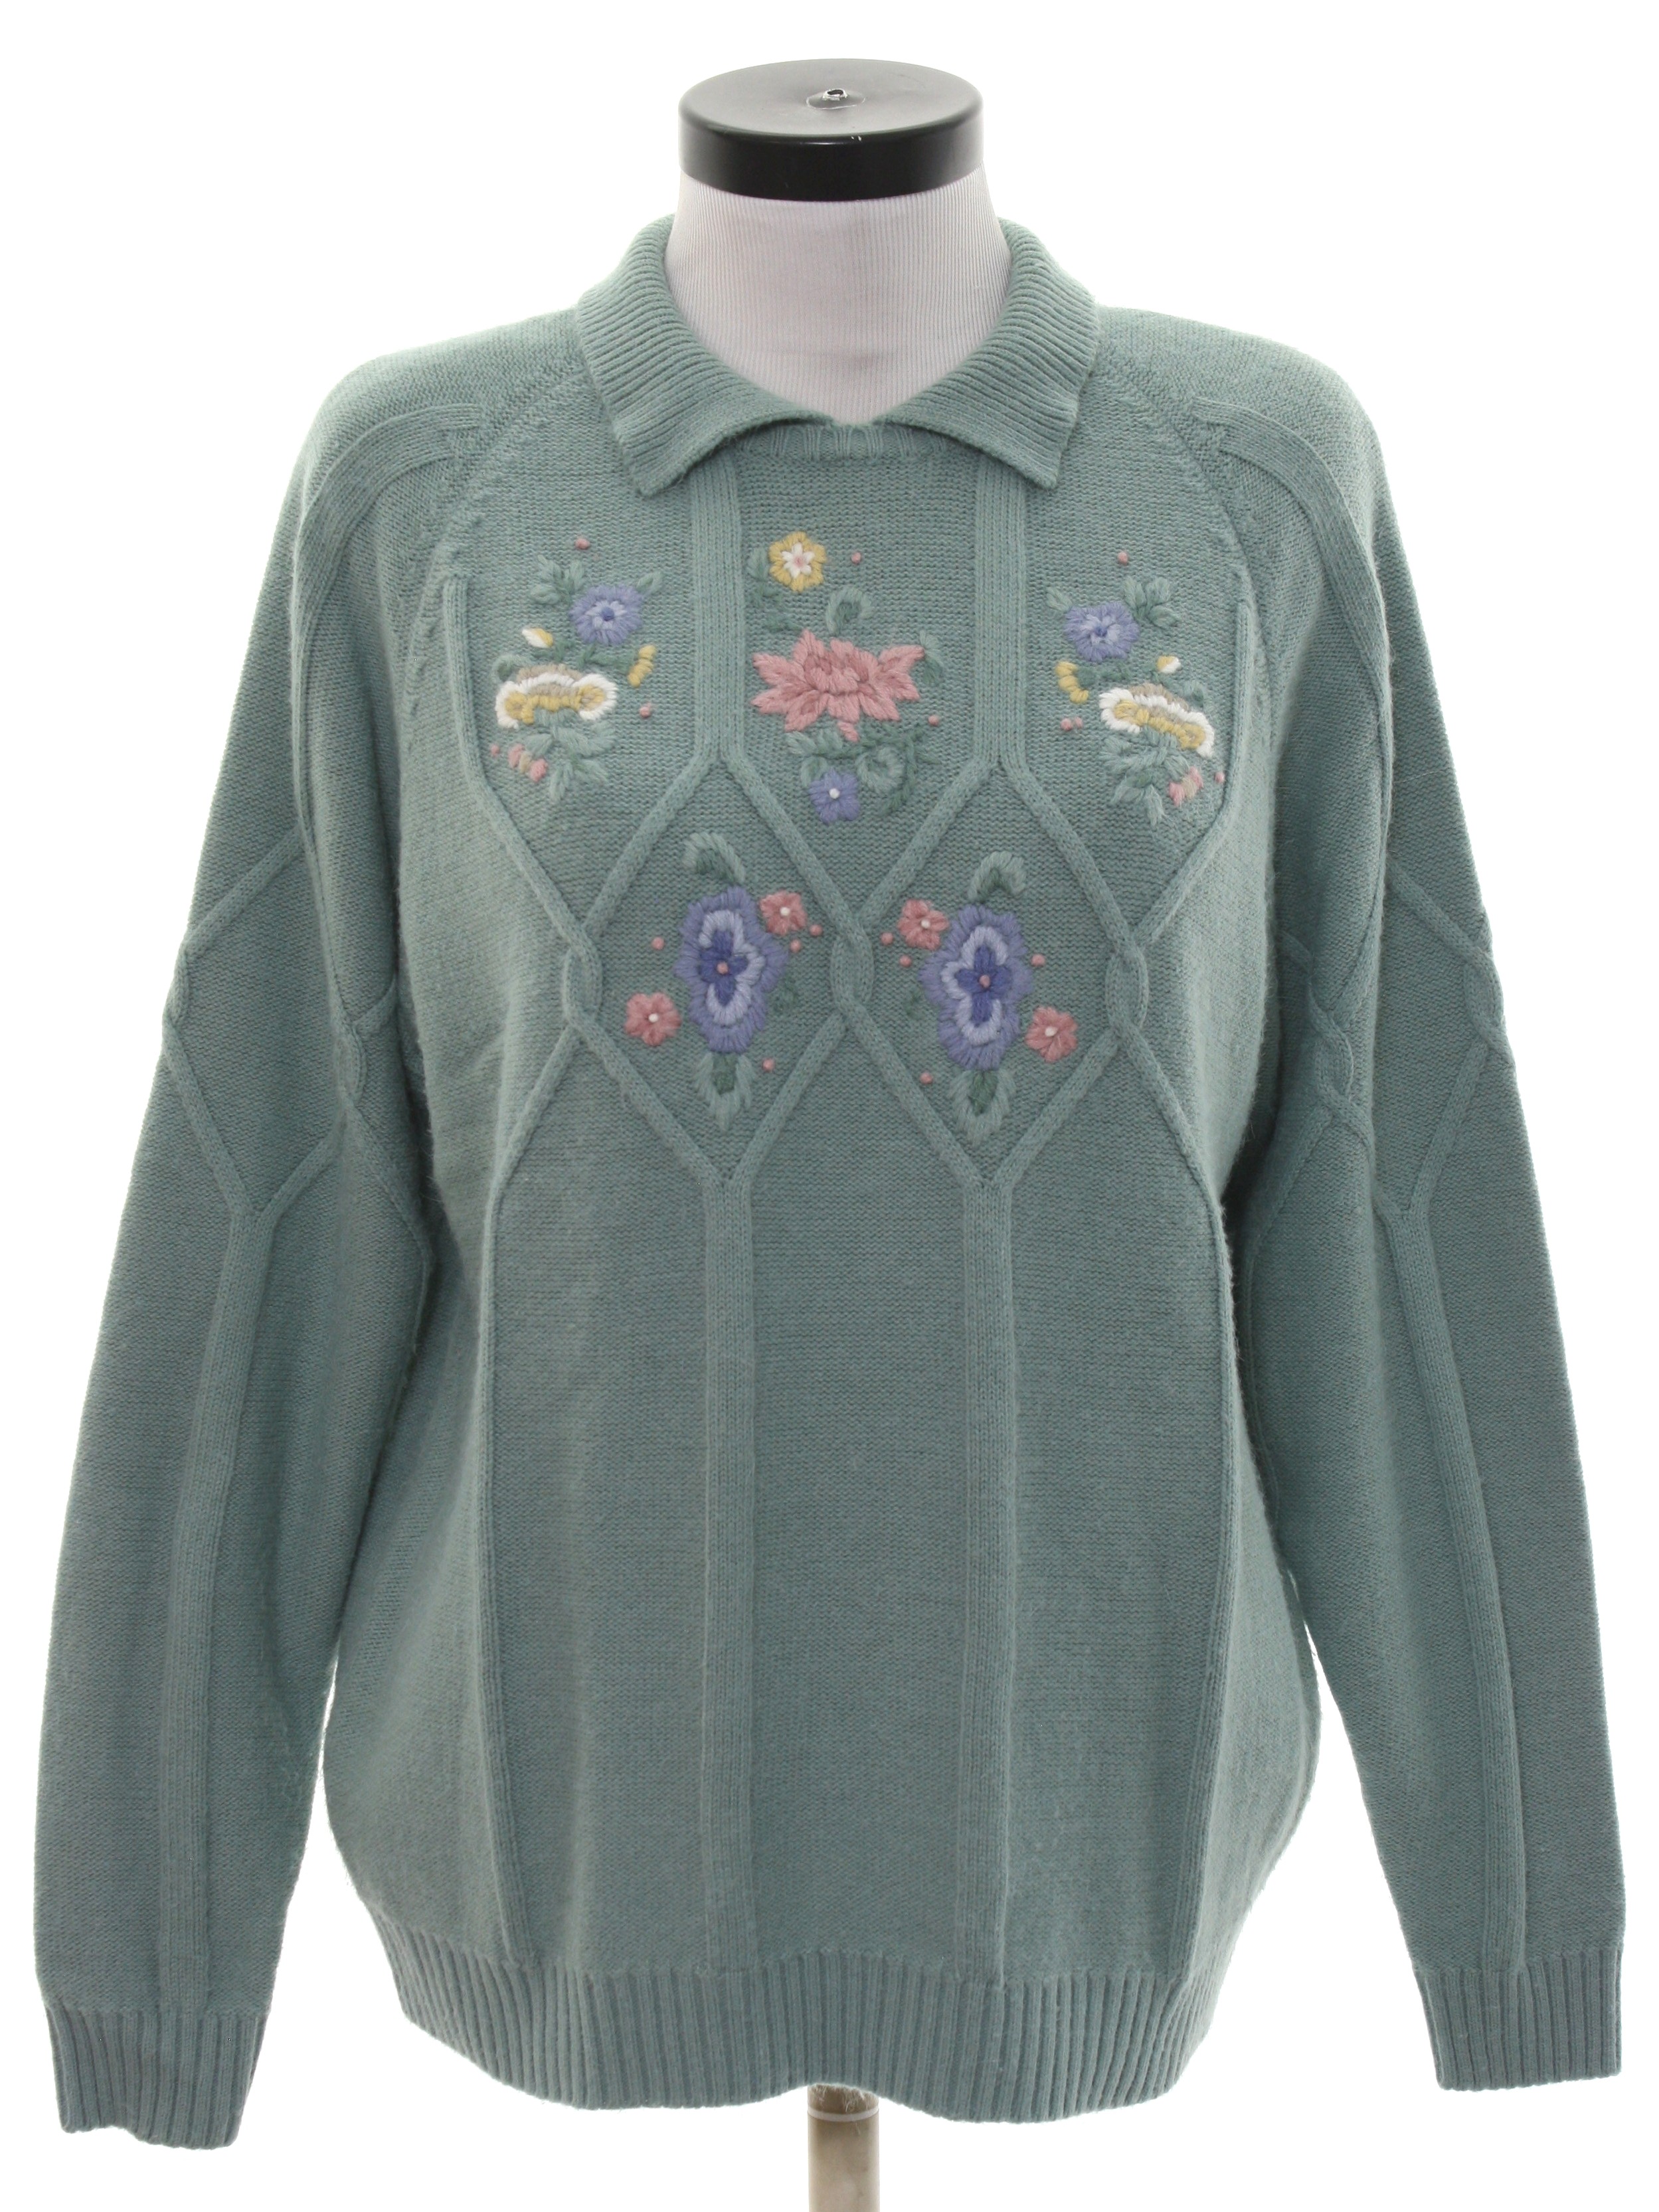 Alfred Dunner Sweater Vintage Store, 55% OFF | www.dalmar.it